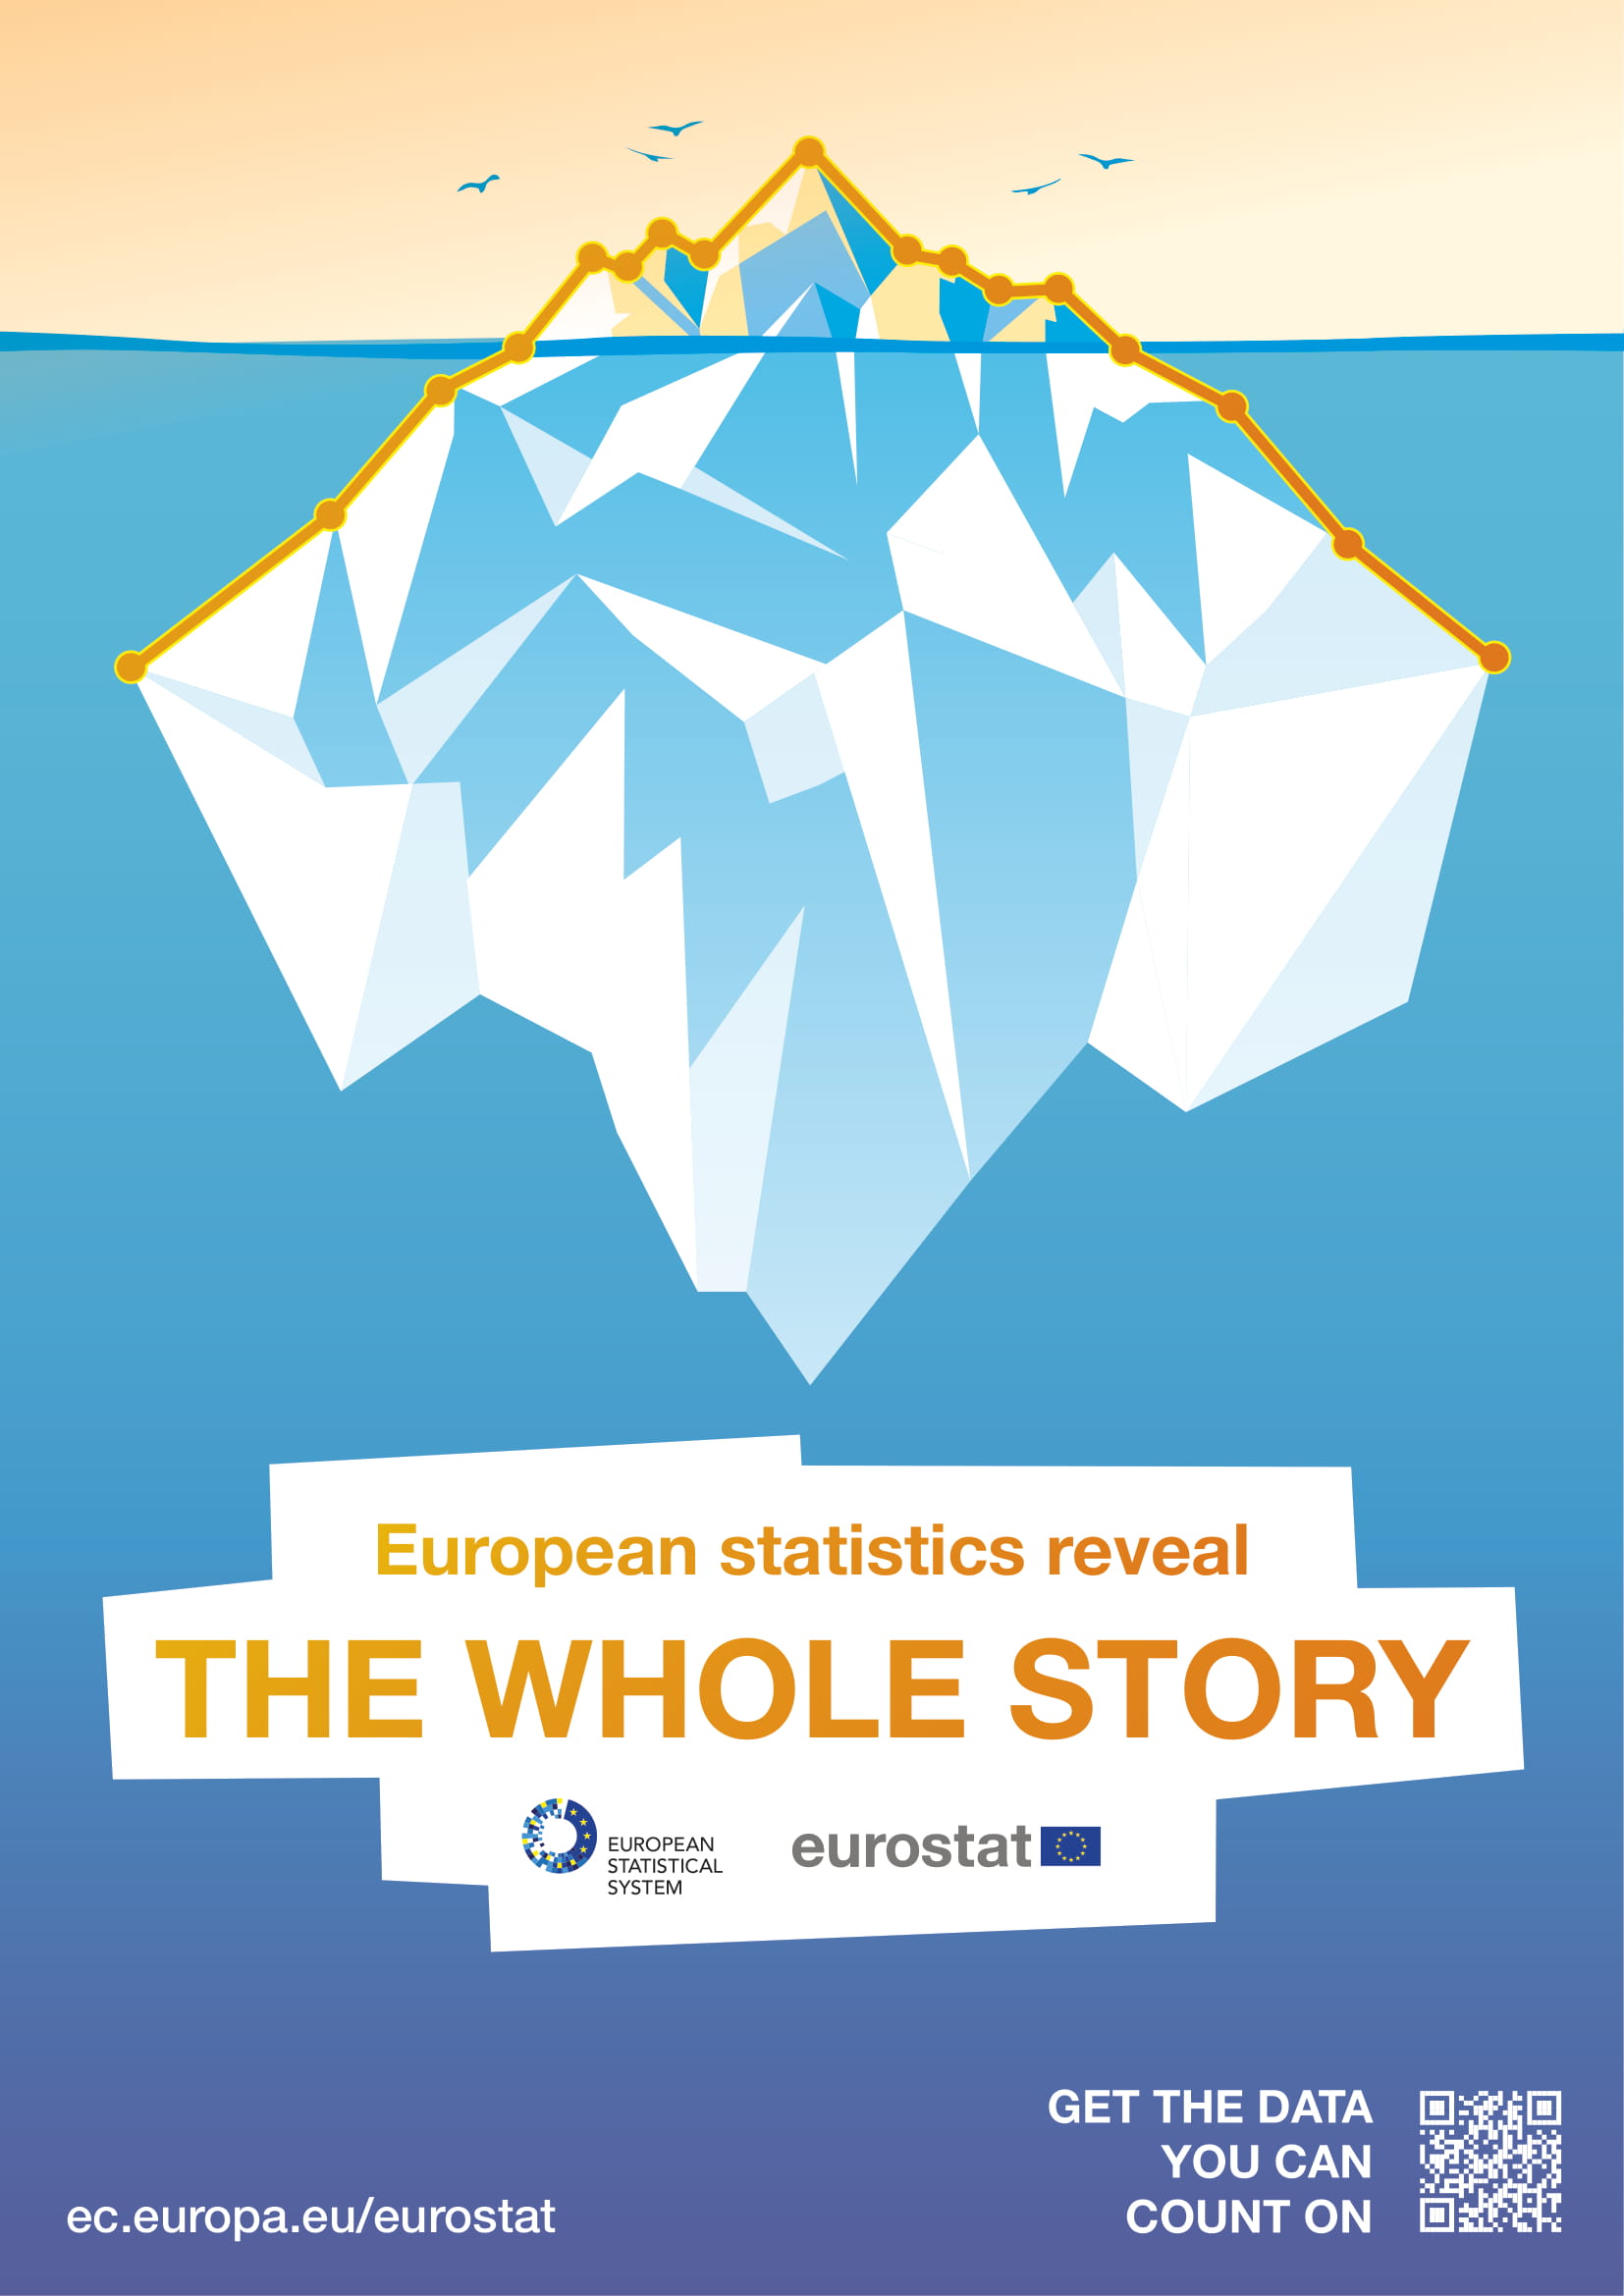 Infographic European Statistics reveal the whole story: The image shows an iceberg and only its summit emerges from the sea. The biggest part of the iceberg lies underwater. An orange line is placed along the shape of the iceberg. Underneath the iceberg there is the text ‘European statistics reveal THE WHOLE STORY’. Below are 2 logos, one of the European Statistical System, the other of Eurostat. At the bottom there is the website address of Eurostat and the text ‘Get the data you can count on’.